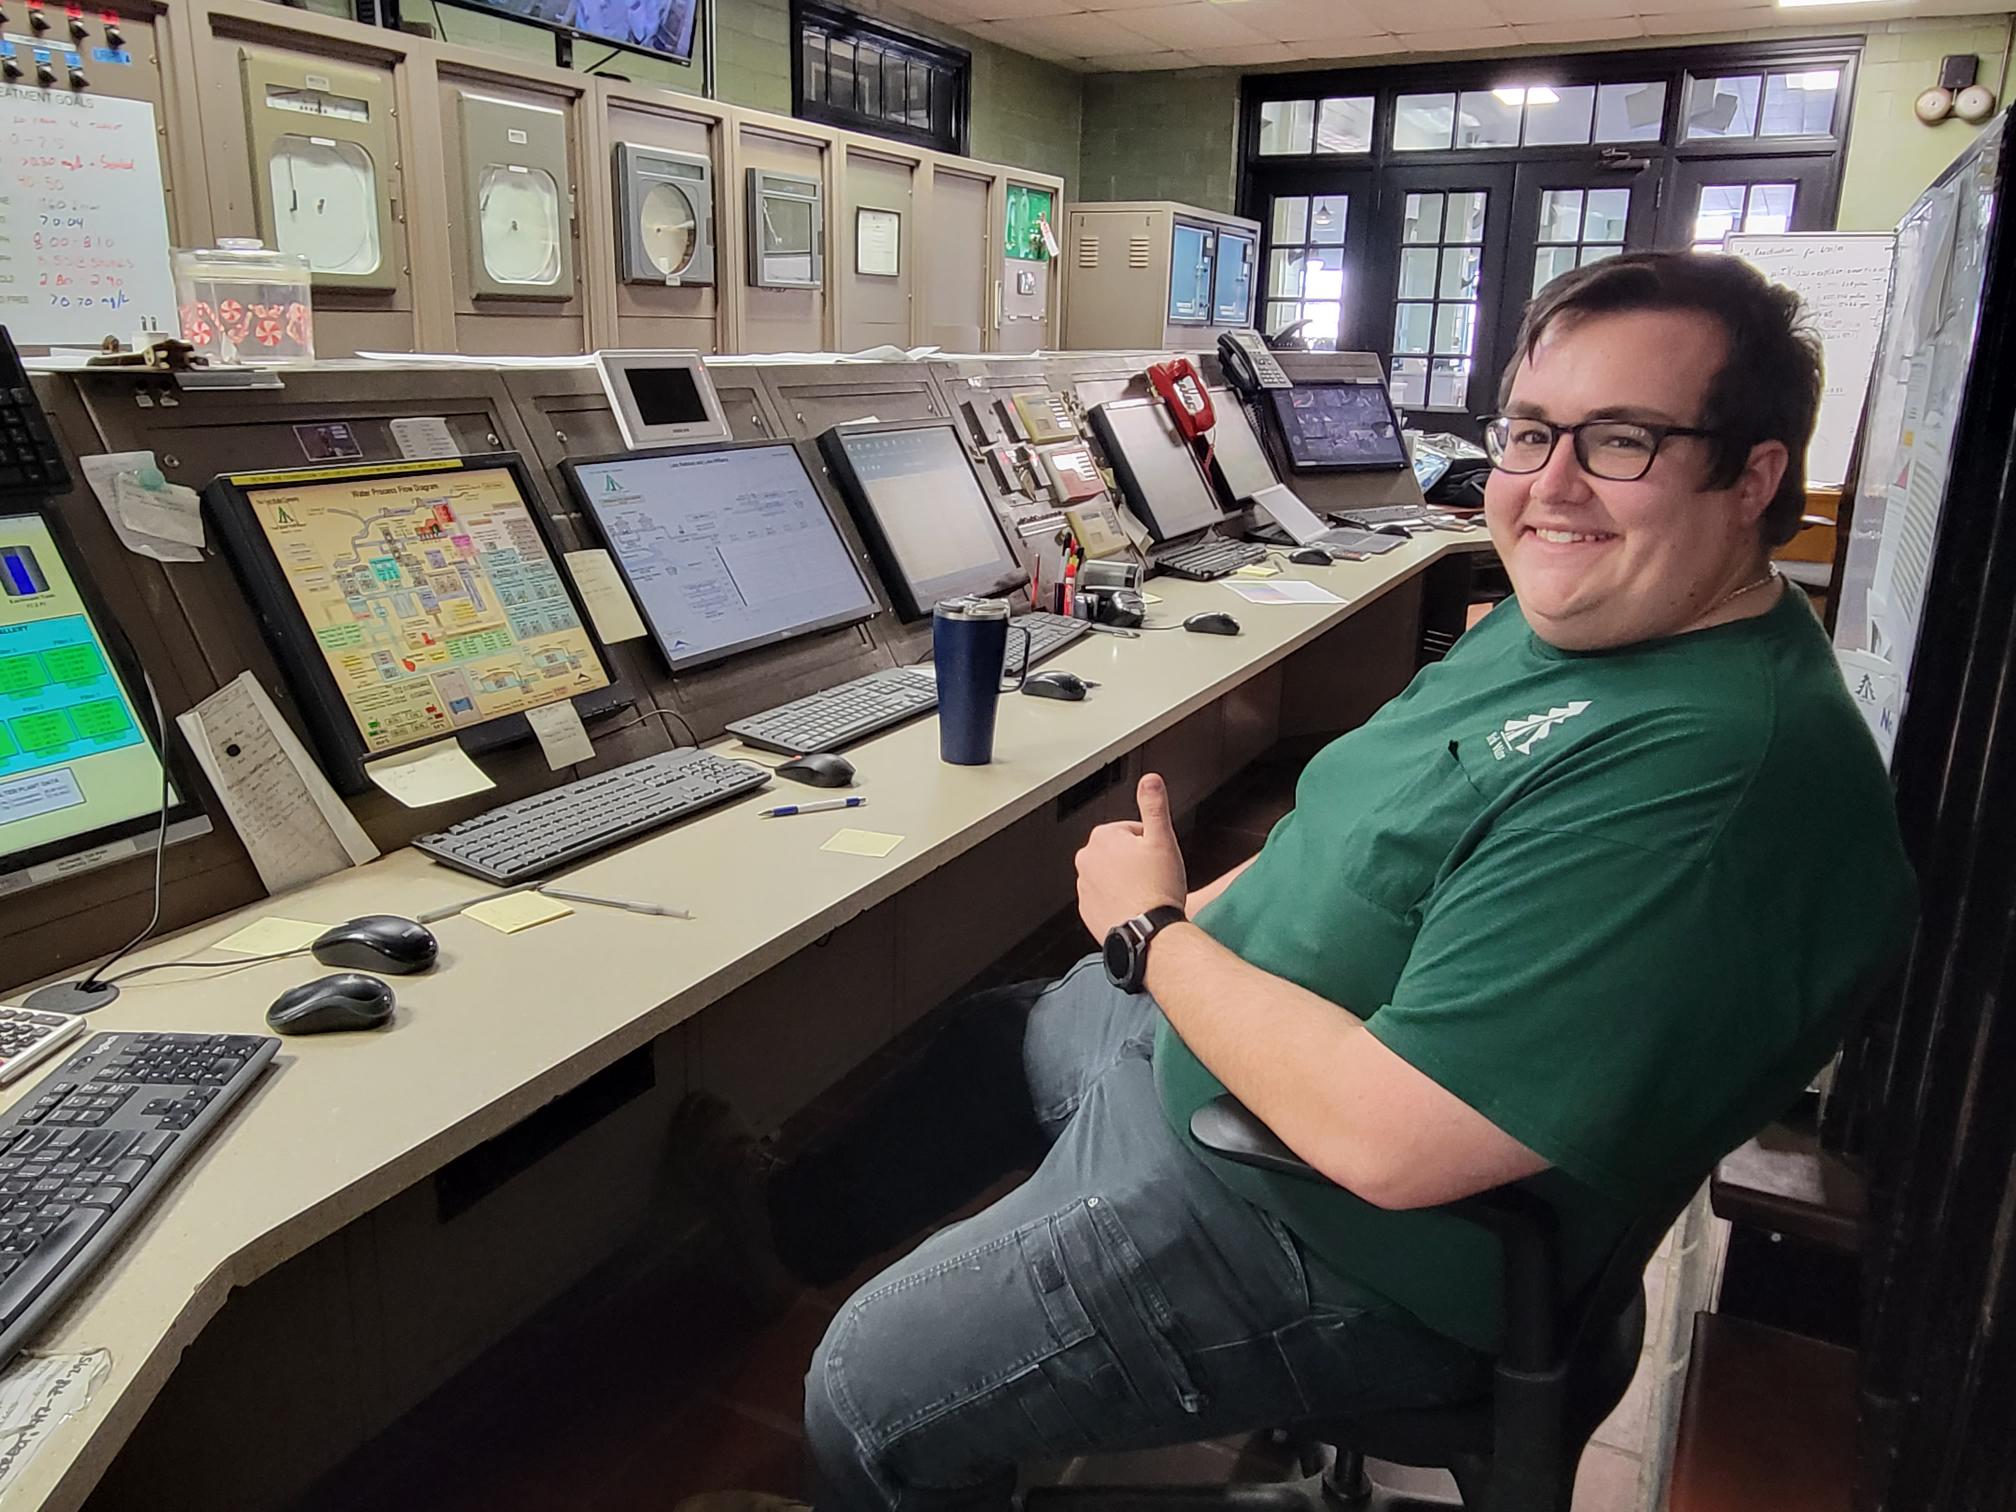 A York Water employee smiles and puts his thumb up while seated at the information console at the Water Filter Plant.